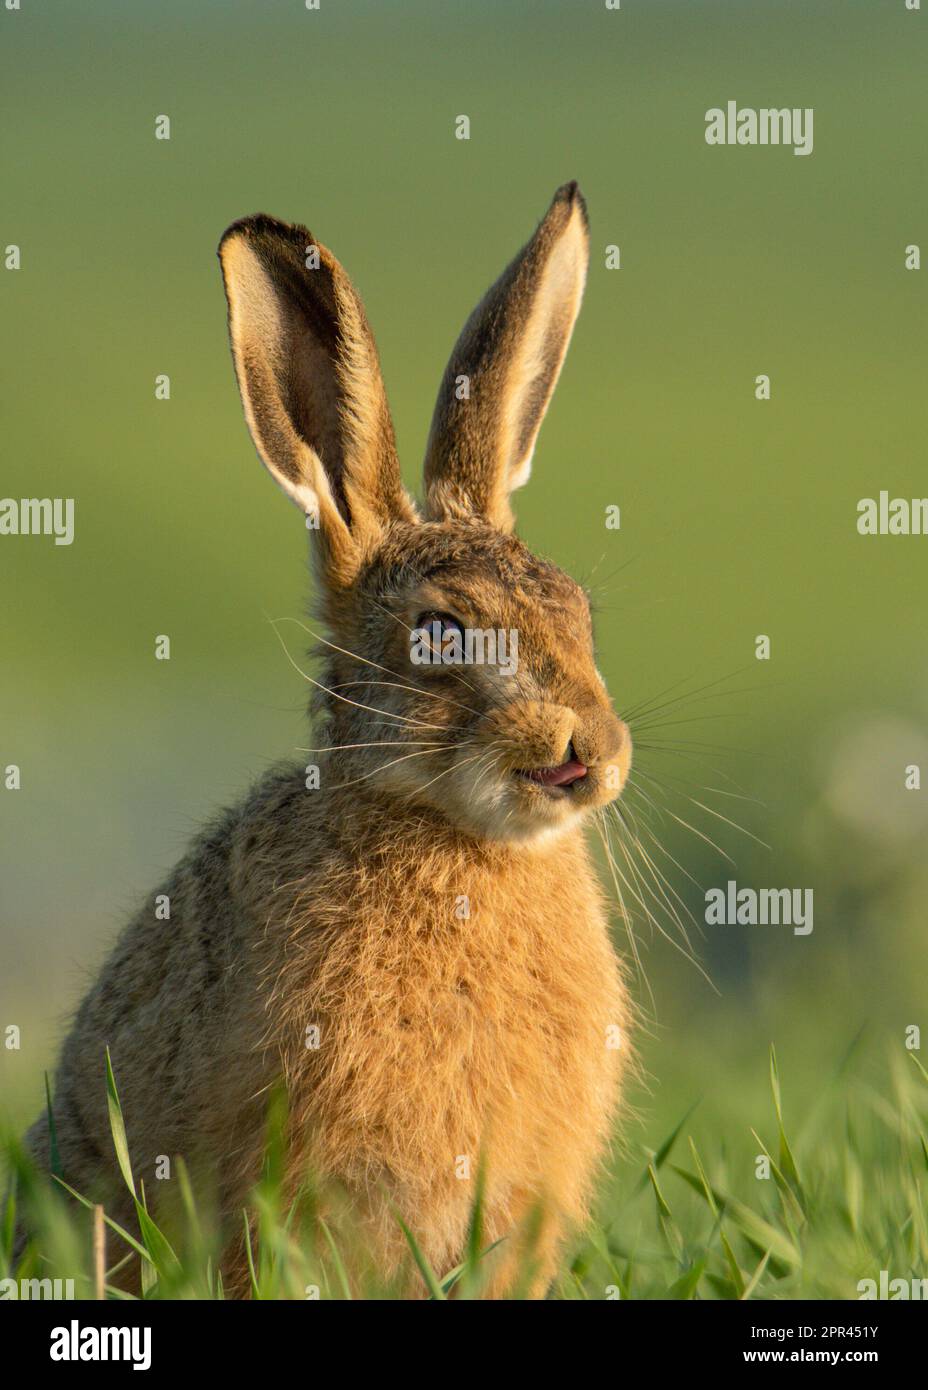 HILARIOUS images of naughty hares pulling faces the funniest of faces have been captured in Dorset. Stock Photo